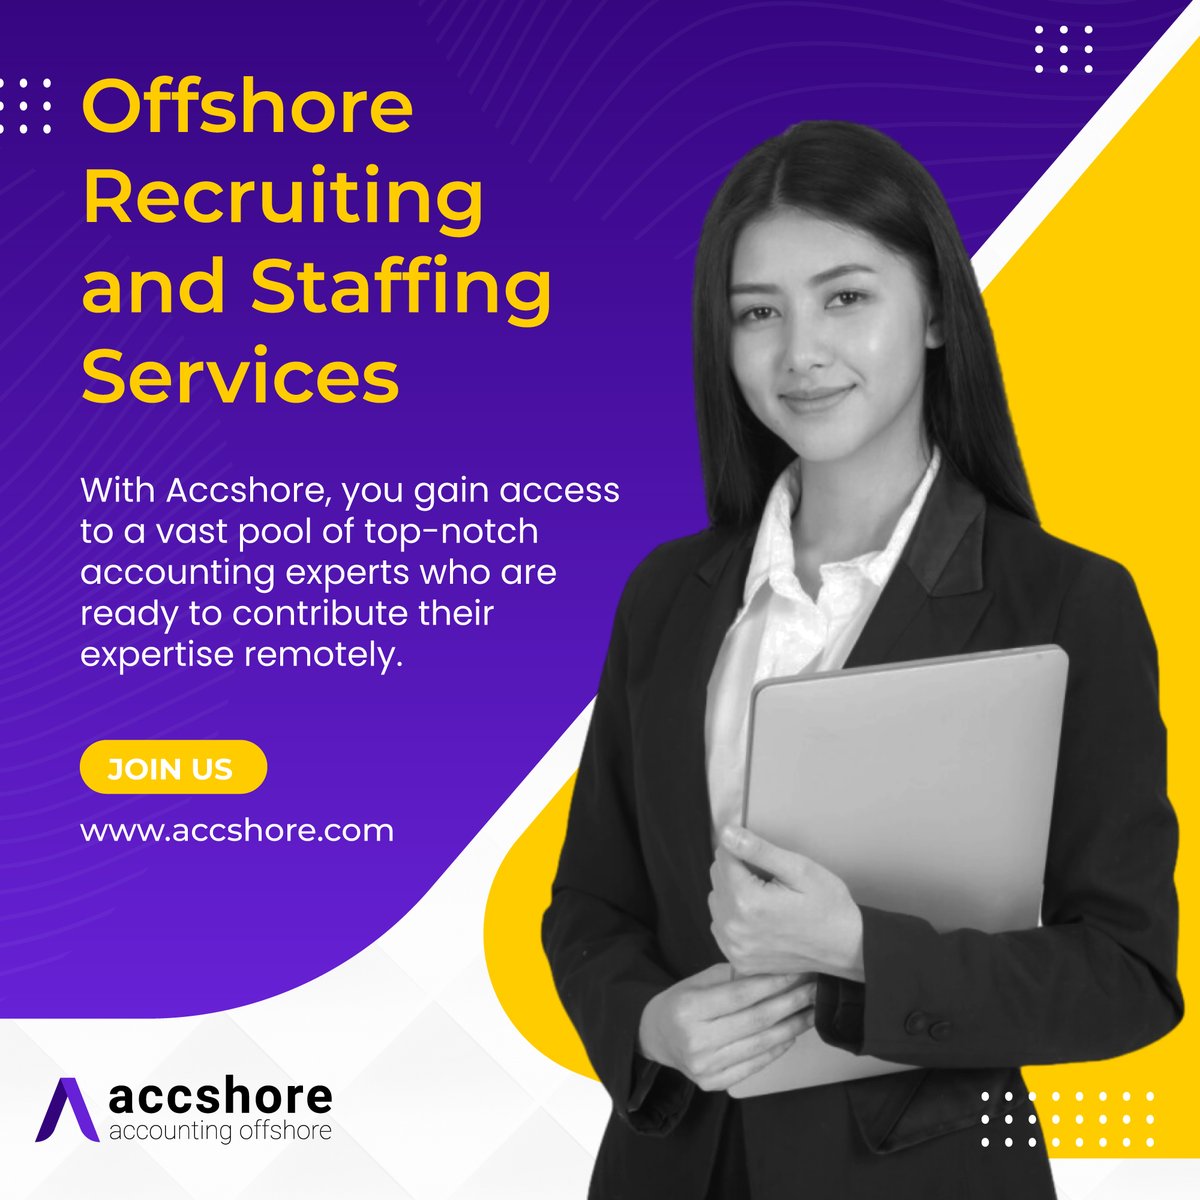 Discover Accshore's Offshore Recruiting and Staffing Services. Find top-notch accounting professionals to join your team, remotely! Visit our website to learn more.

#offshorestaffing #offshorerecruiting #offshorejobs #offshoreteam #offshoreservices #offshoredevelopment #Threads